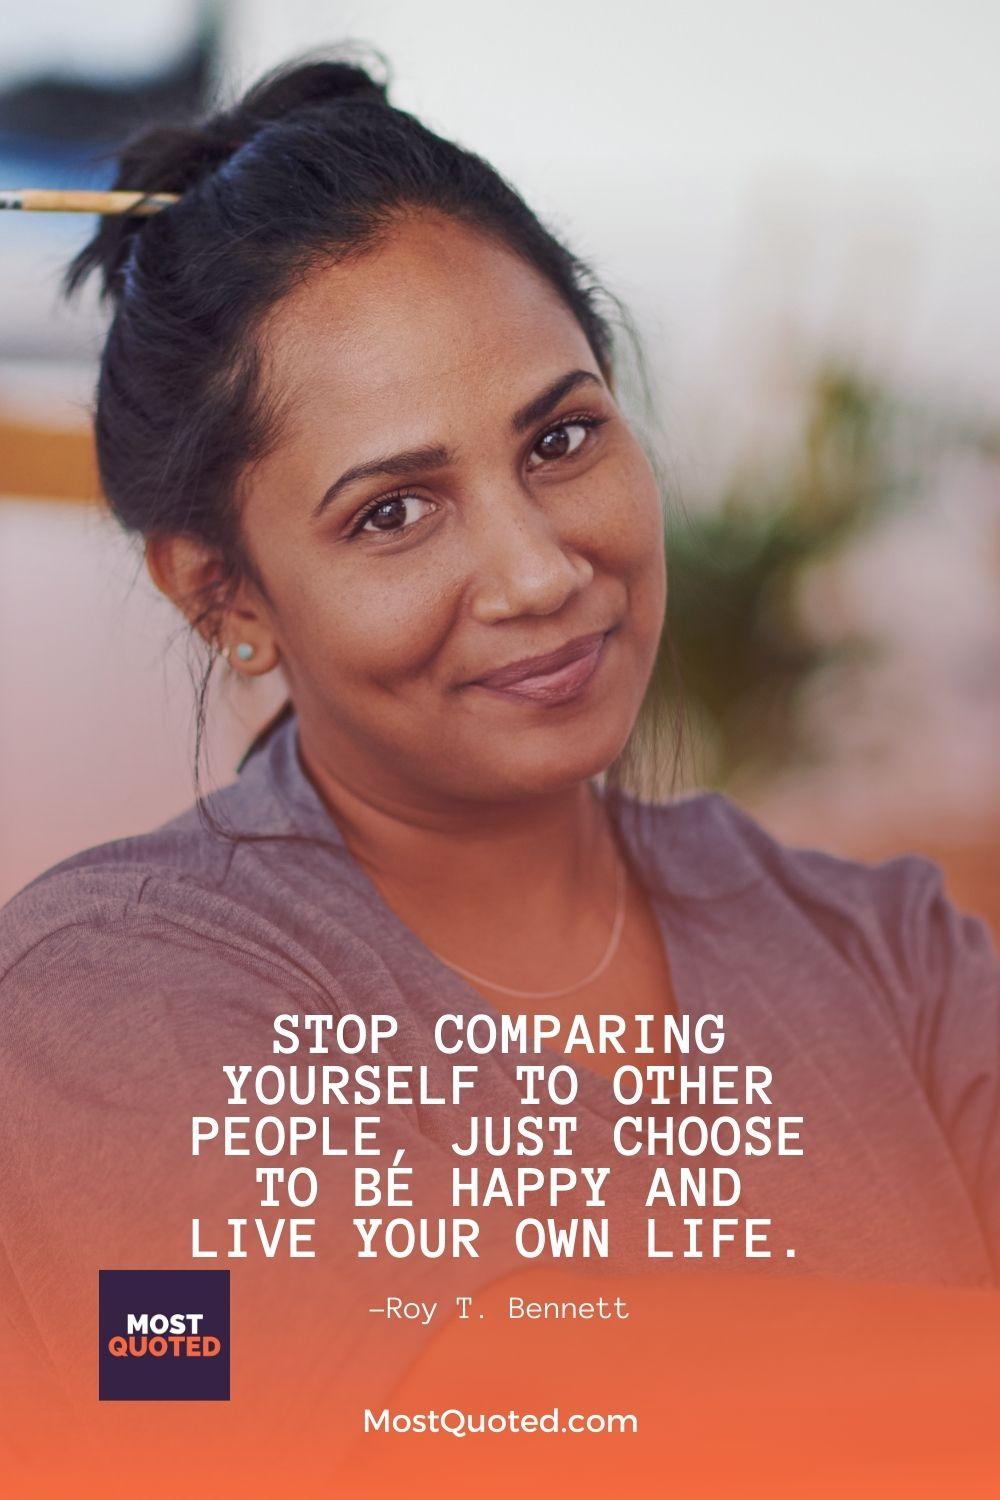 Stop comparing yourself to other people, just choose to be happy and live your own life. - Roy T. Bennett